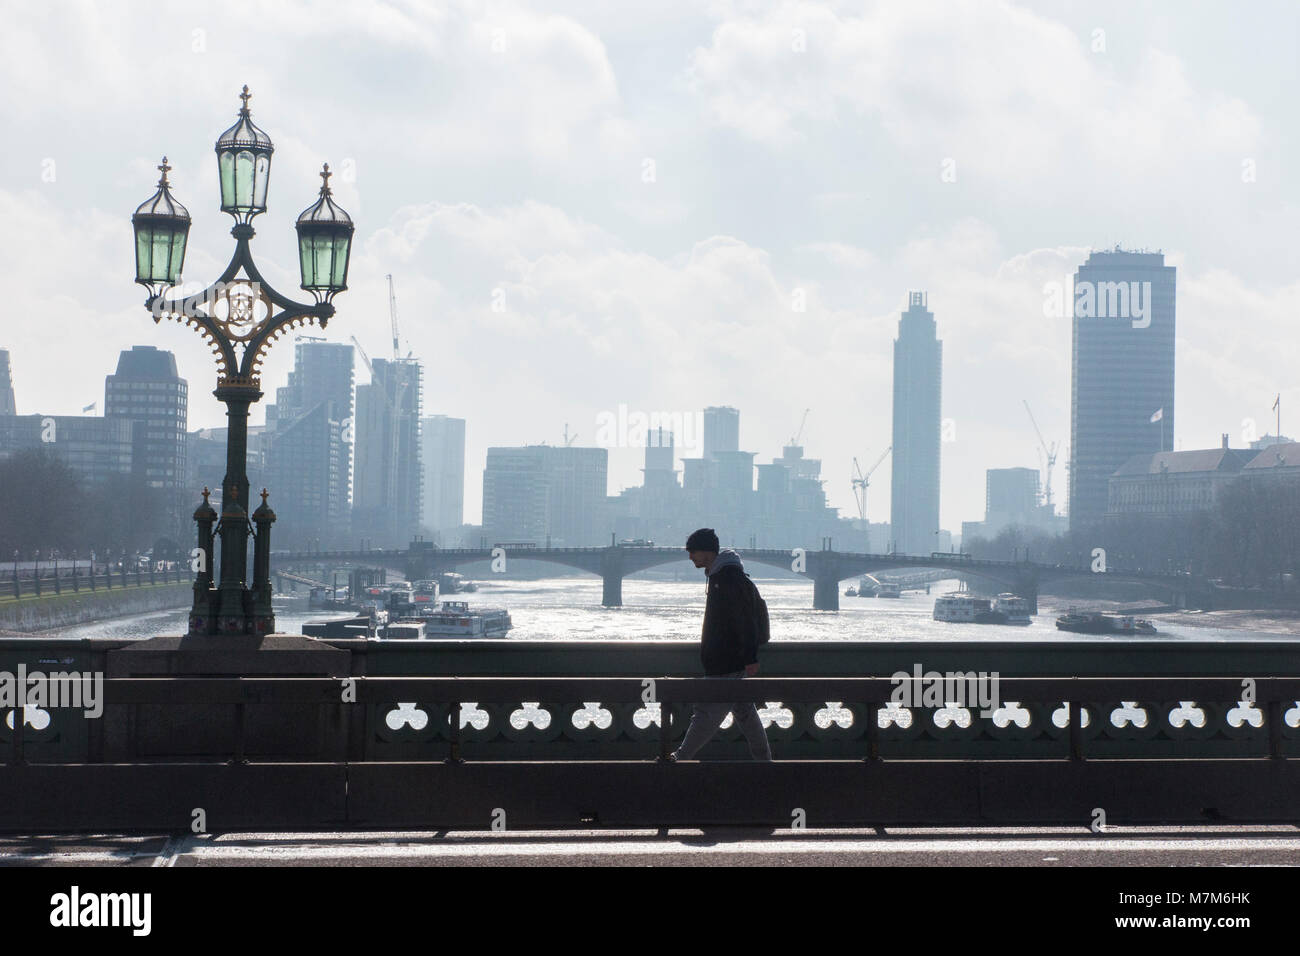 A pedestrian crosses the River Thames on a cold and misty morning Stock Photo